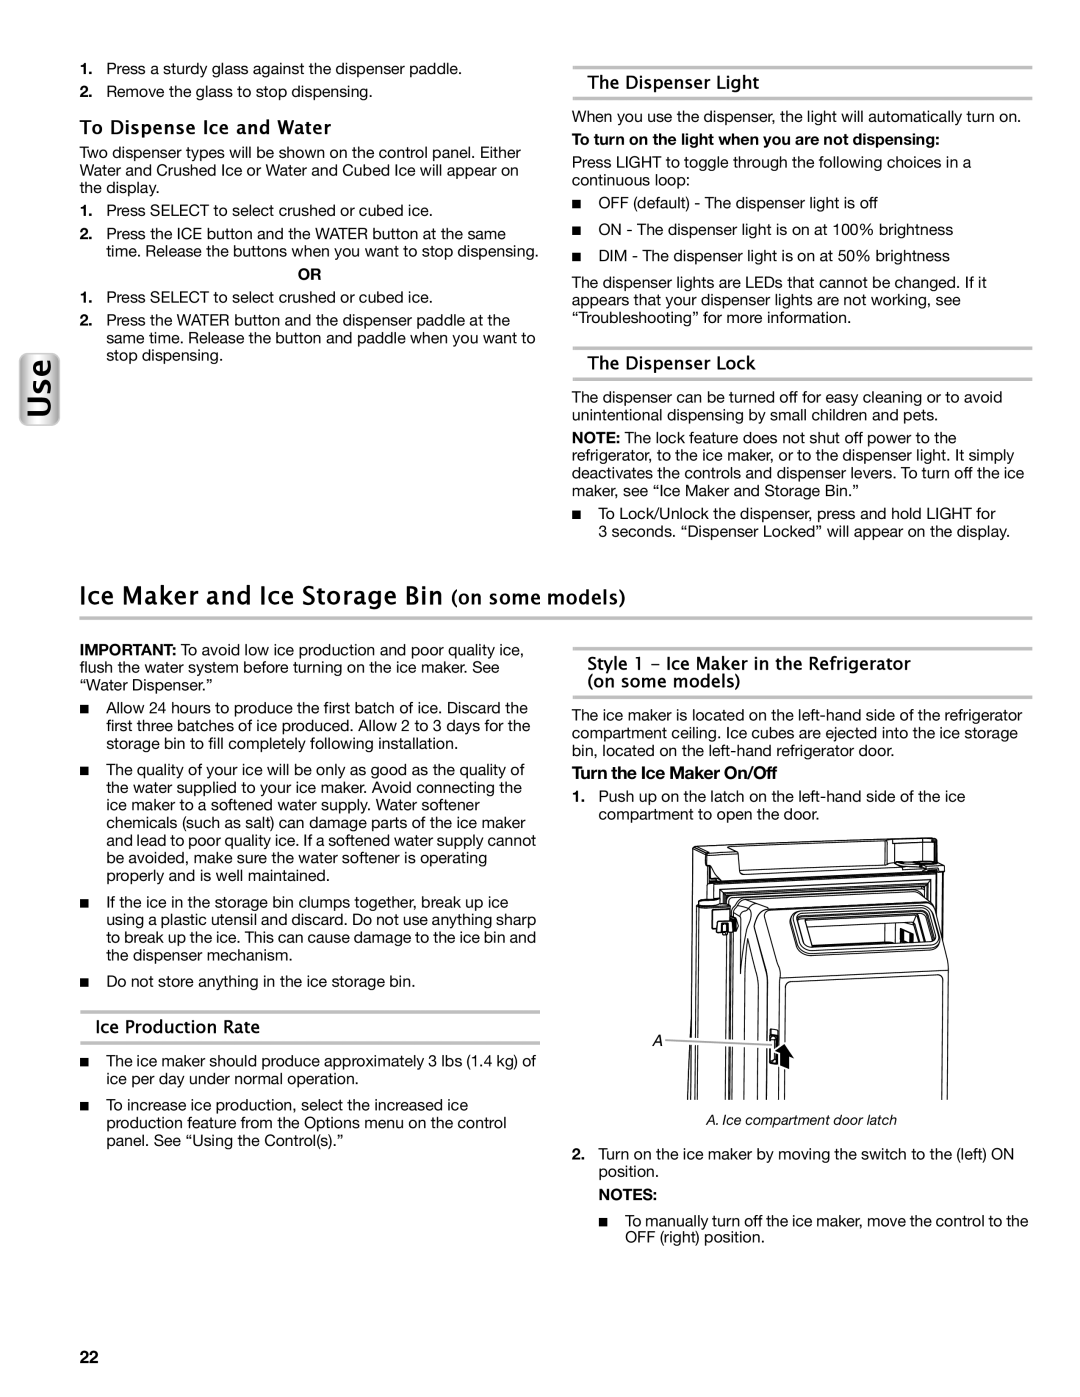 Maytag W10558103A manual Ice Maker and Ice Storage Bin on some models, To Dispense Ice and Water 